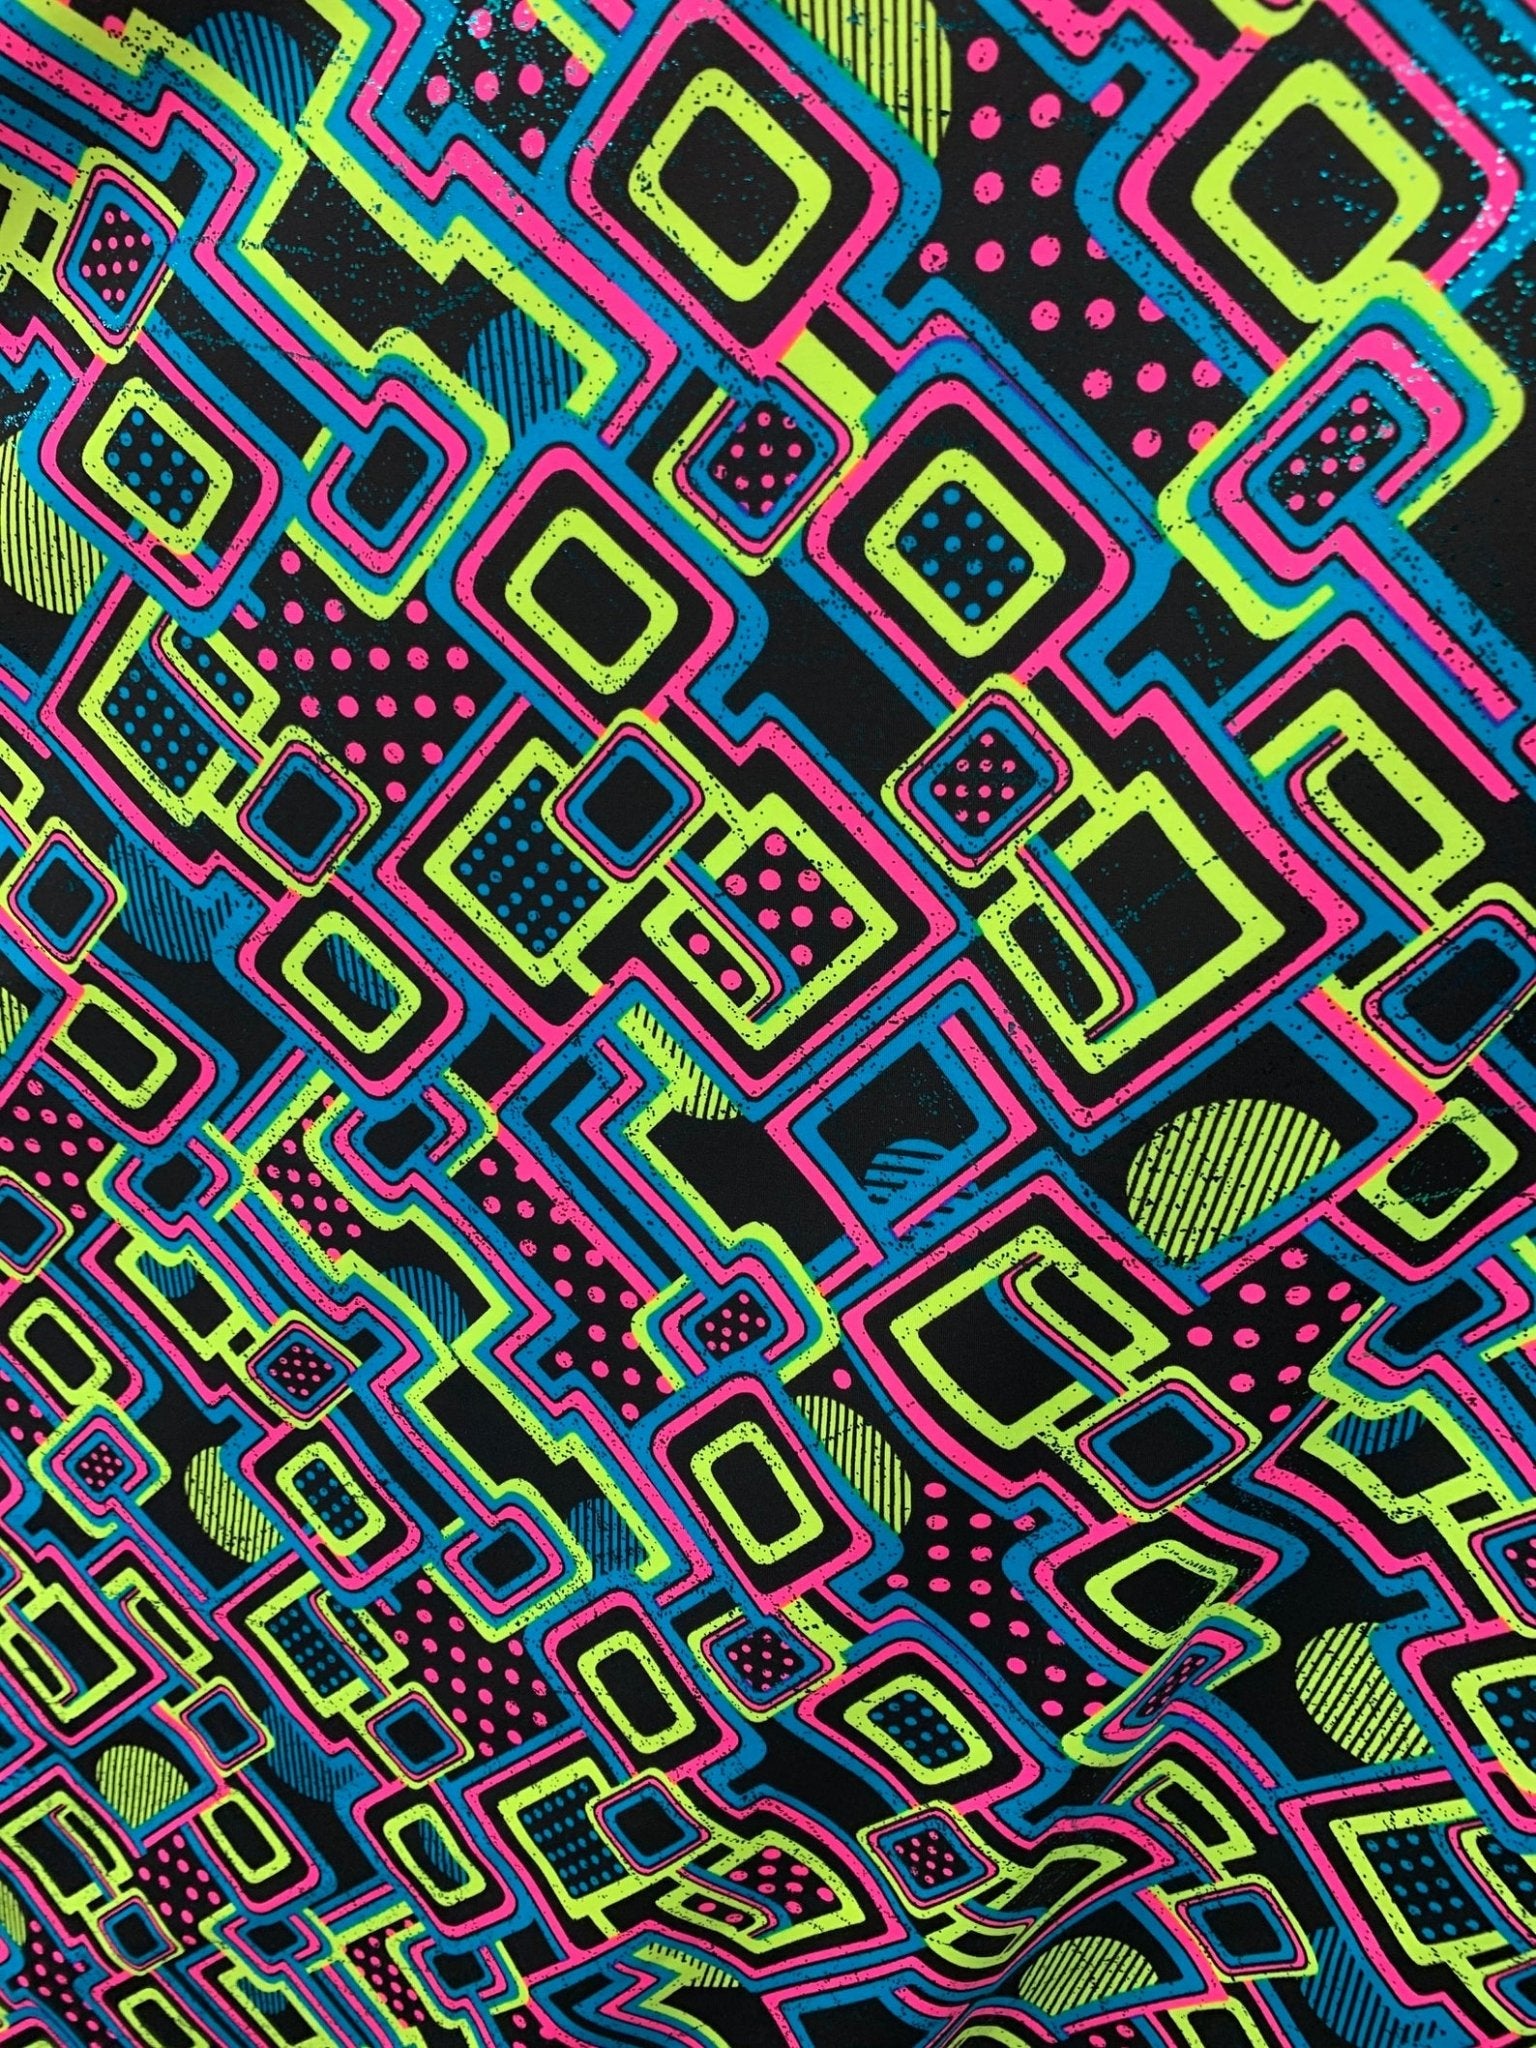 Multi_color Square Poly Spandex Swimsuit Fabric By The YardSpandex FabricICEFABRICICE FABRICSMulti_color Square Poly Spandex Swimsuit Fabric By The Yard ICEFABRIC